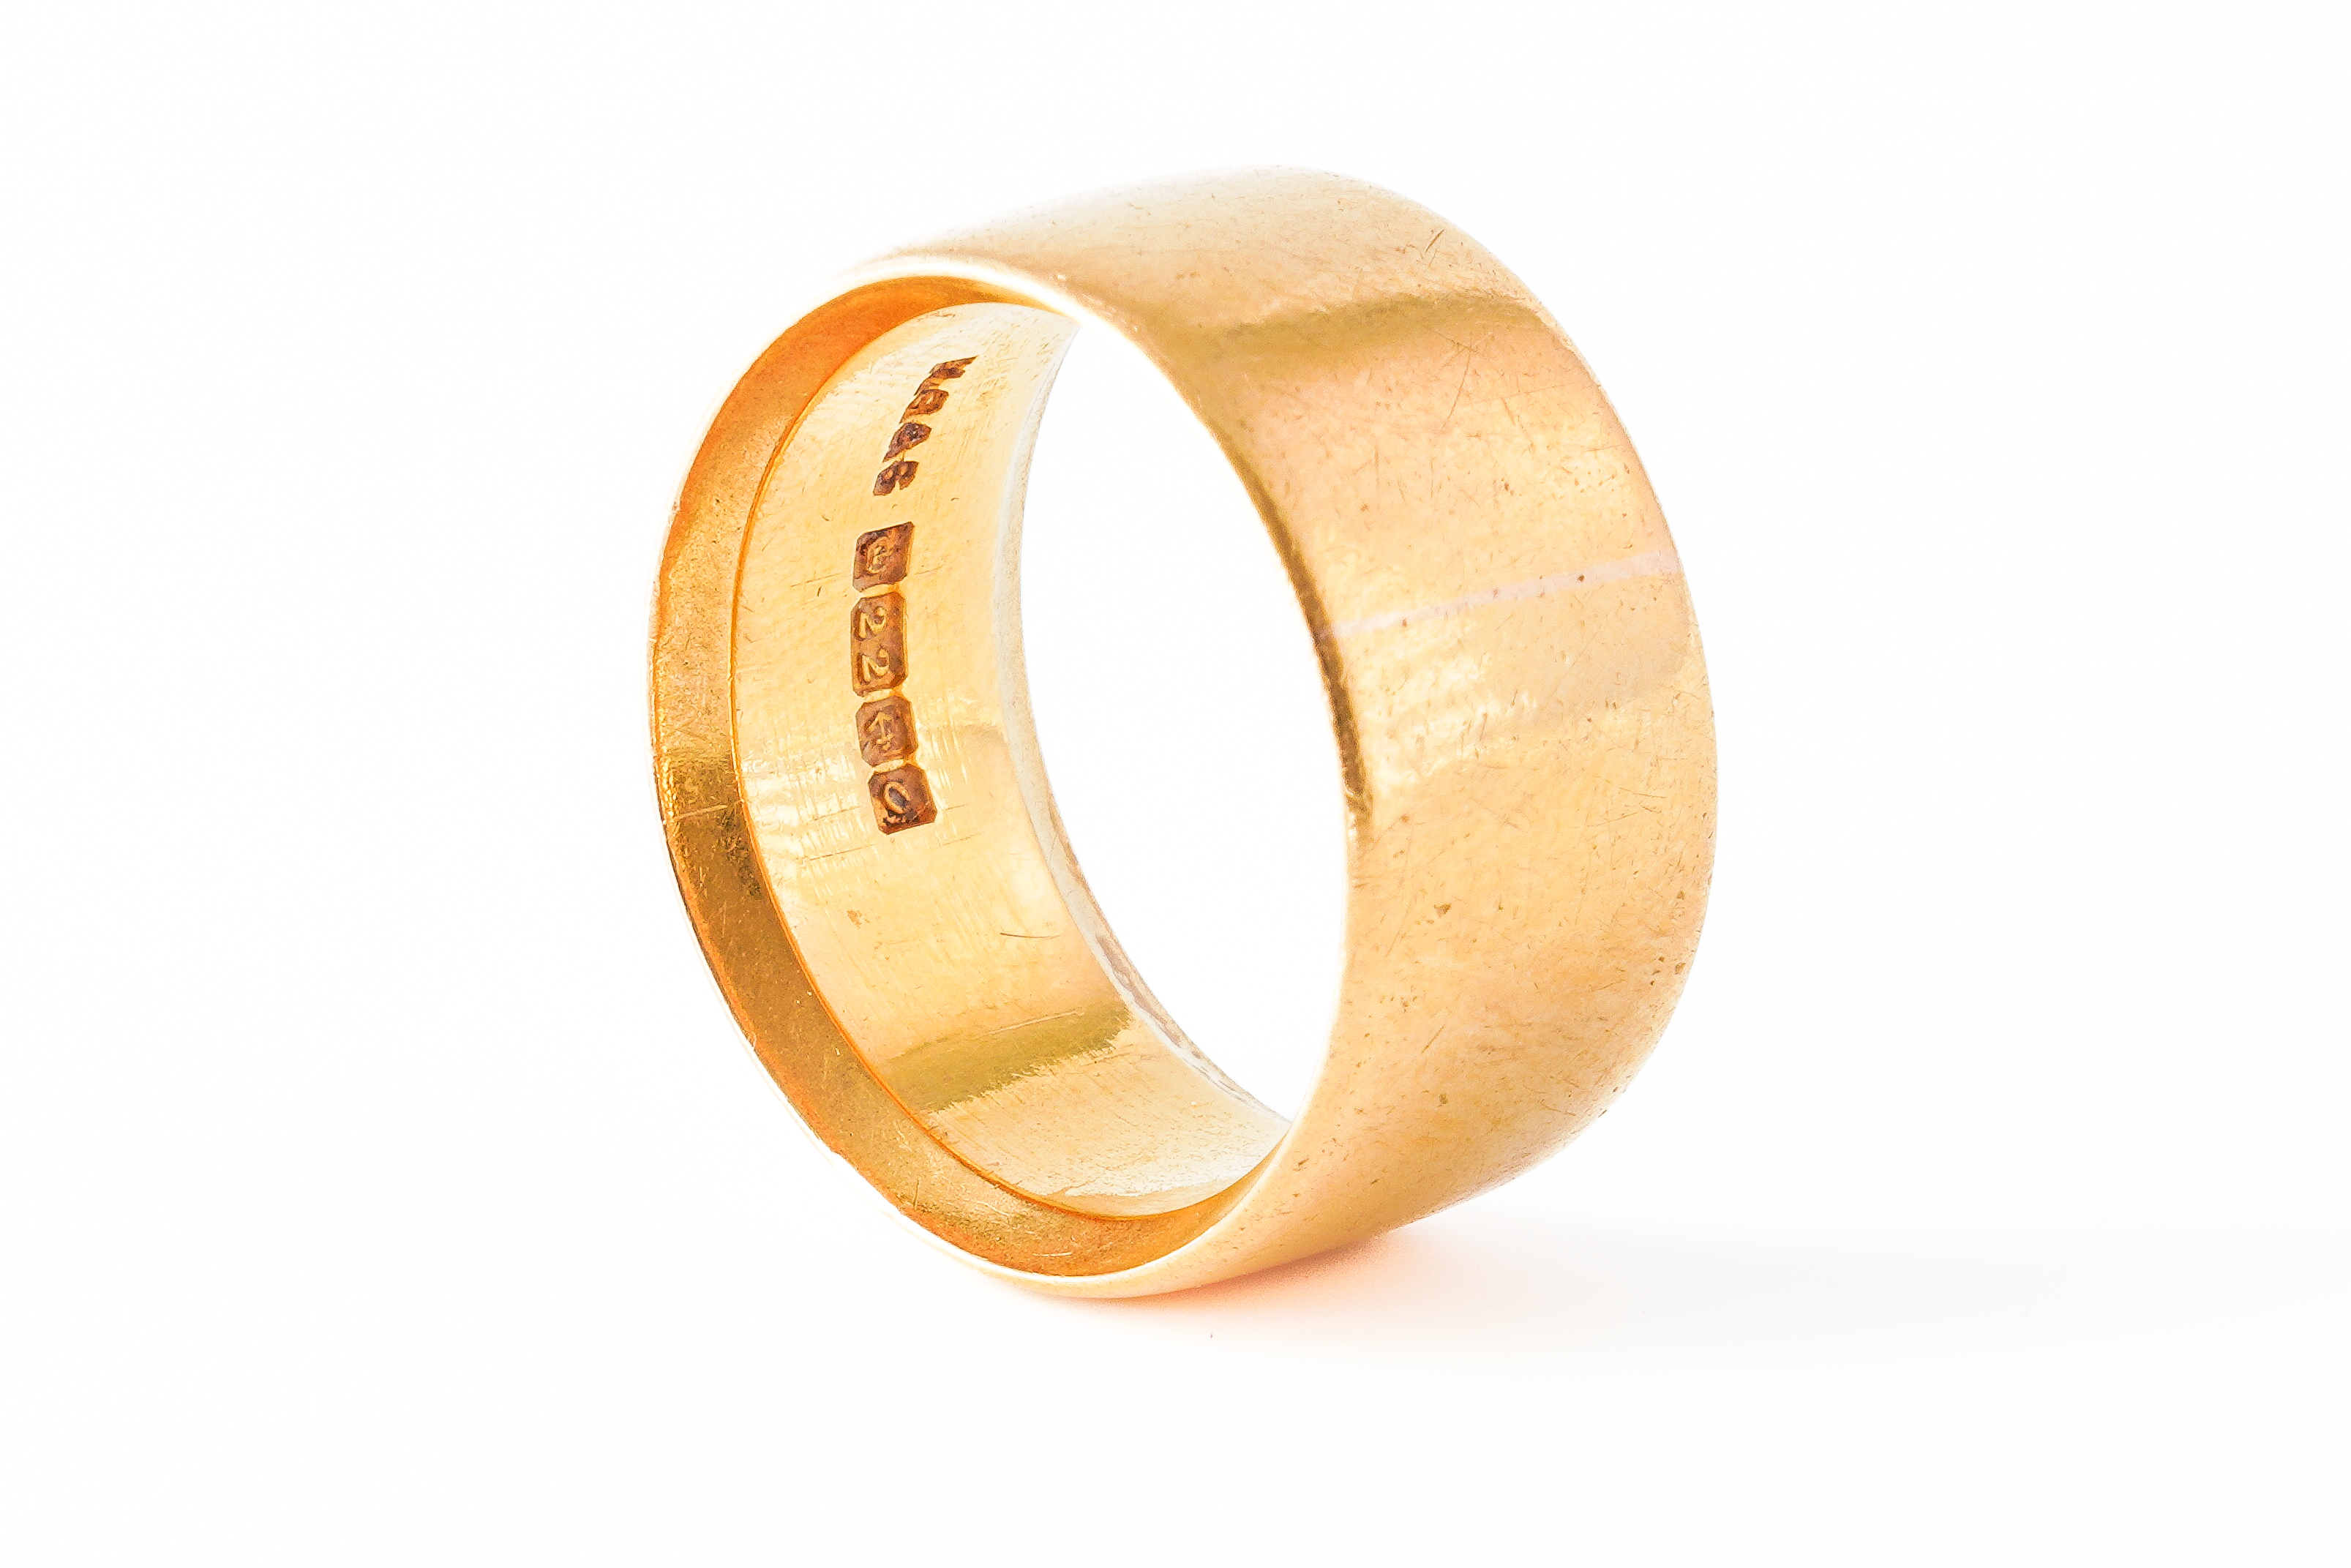 A 22CT GOLD WIDE BAND WEDDING RING - Image 3 of 3